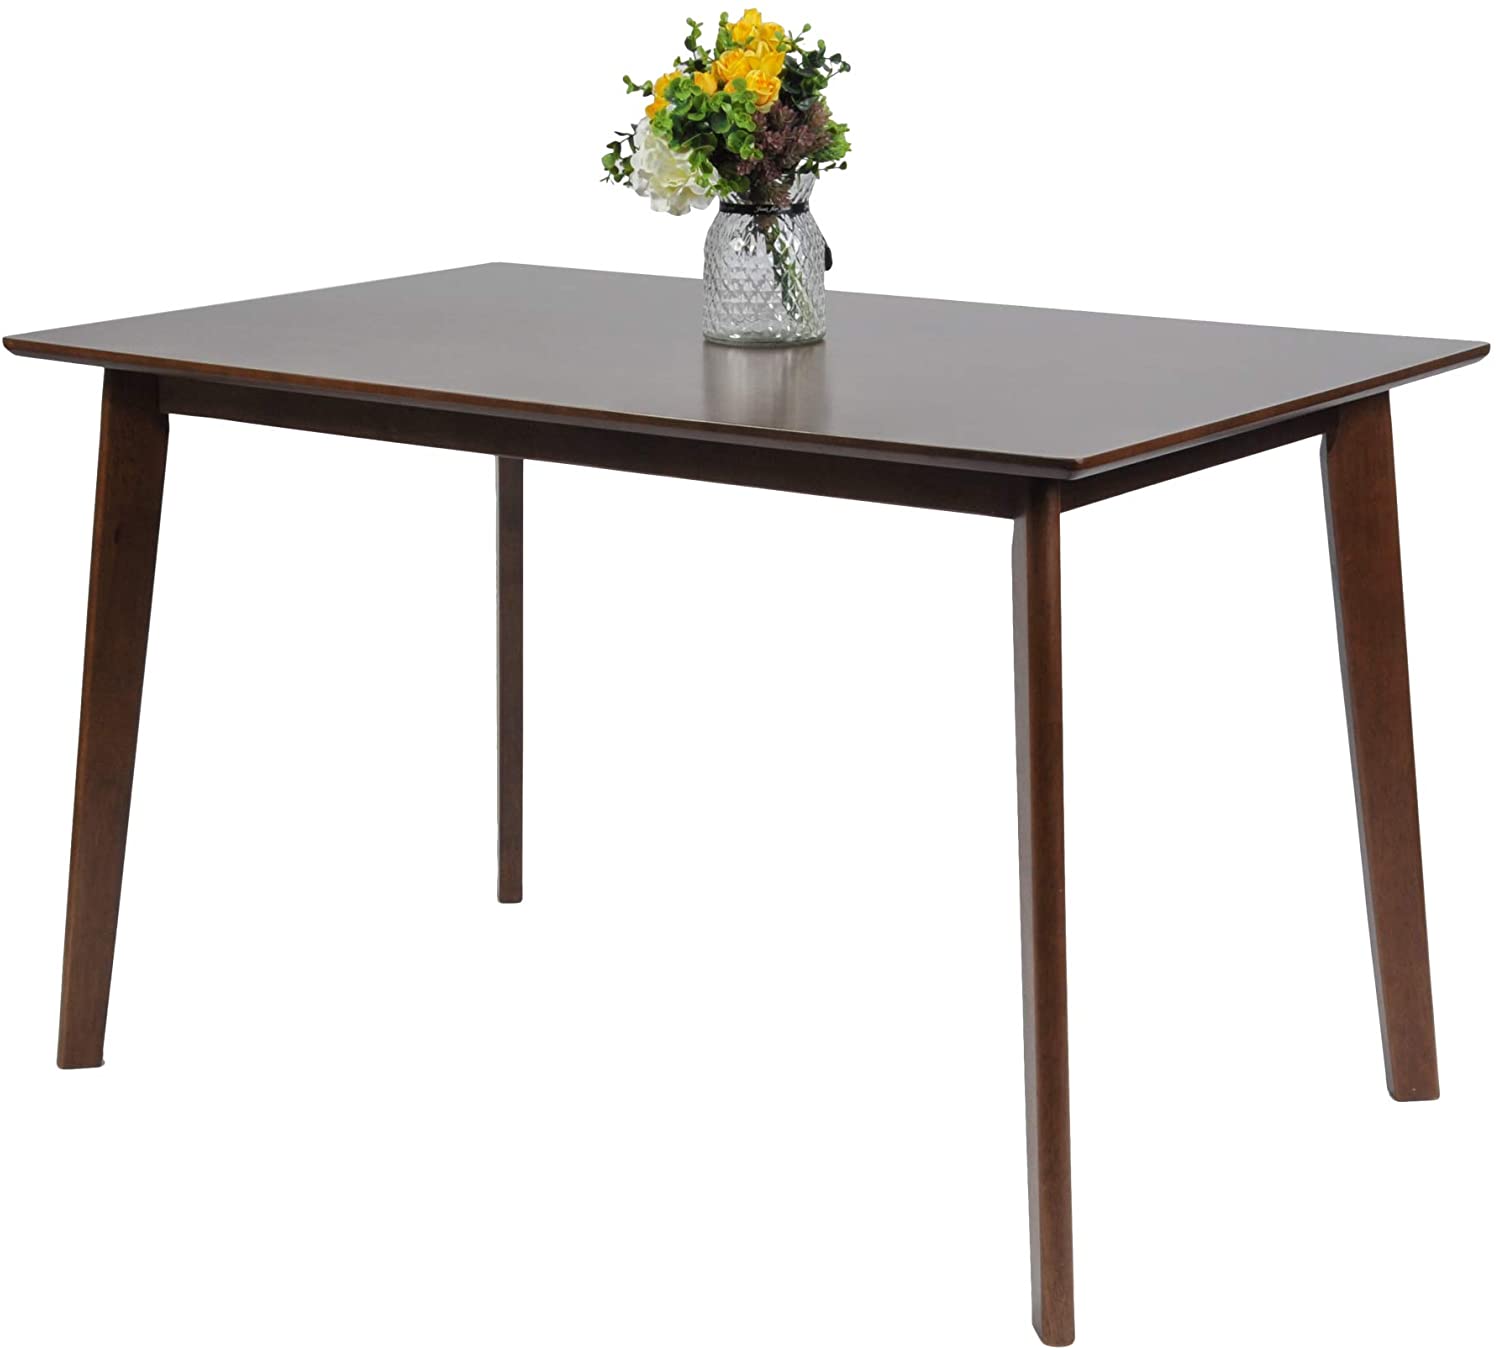 B07Q1C3616 LUCKYERMORE Dining Room Table Rectangle Modern Mid Century Home Furniture Kitchen Restaurant Wood Table